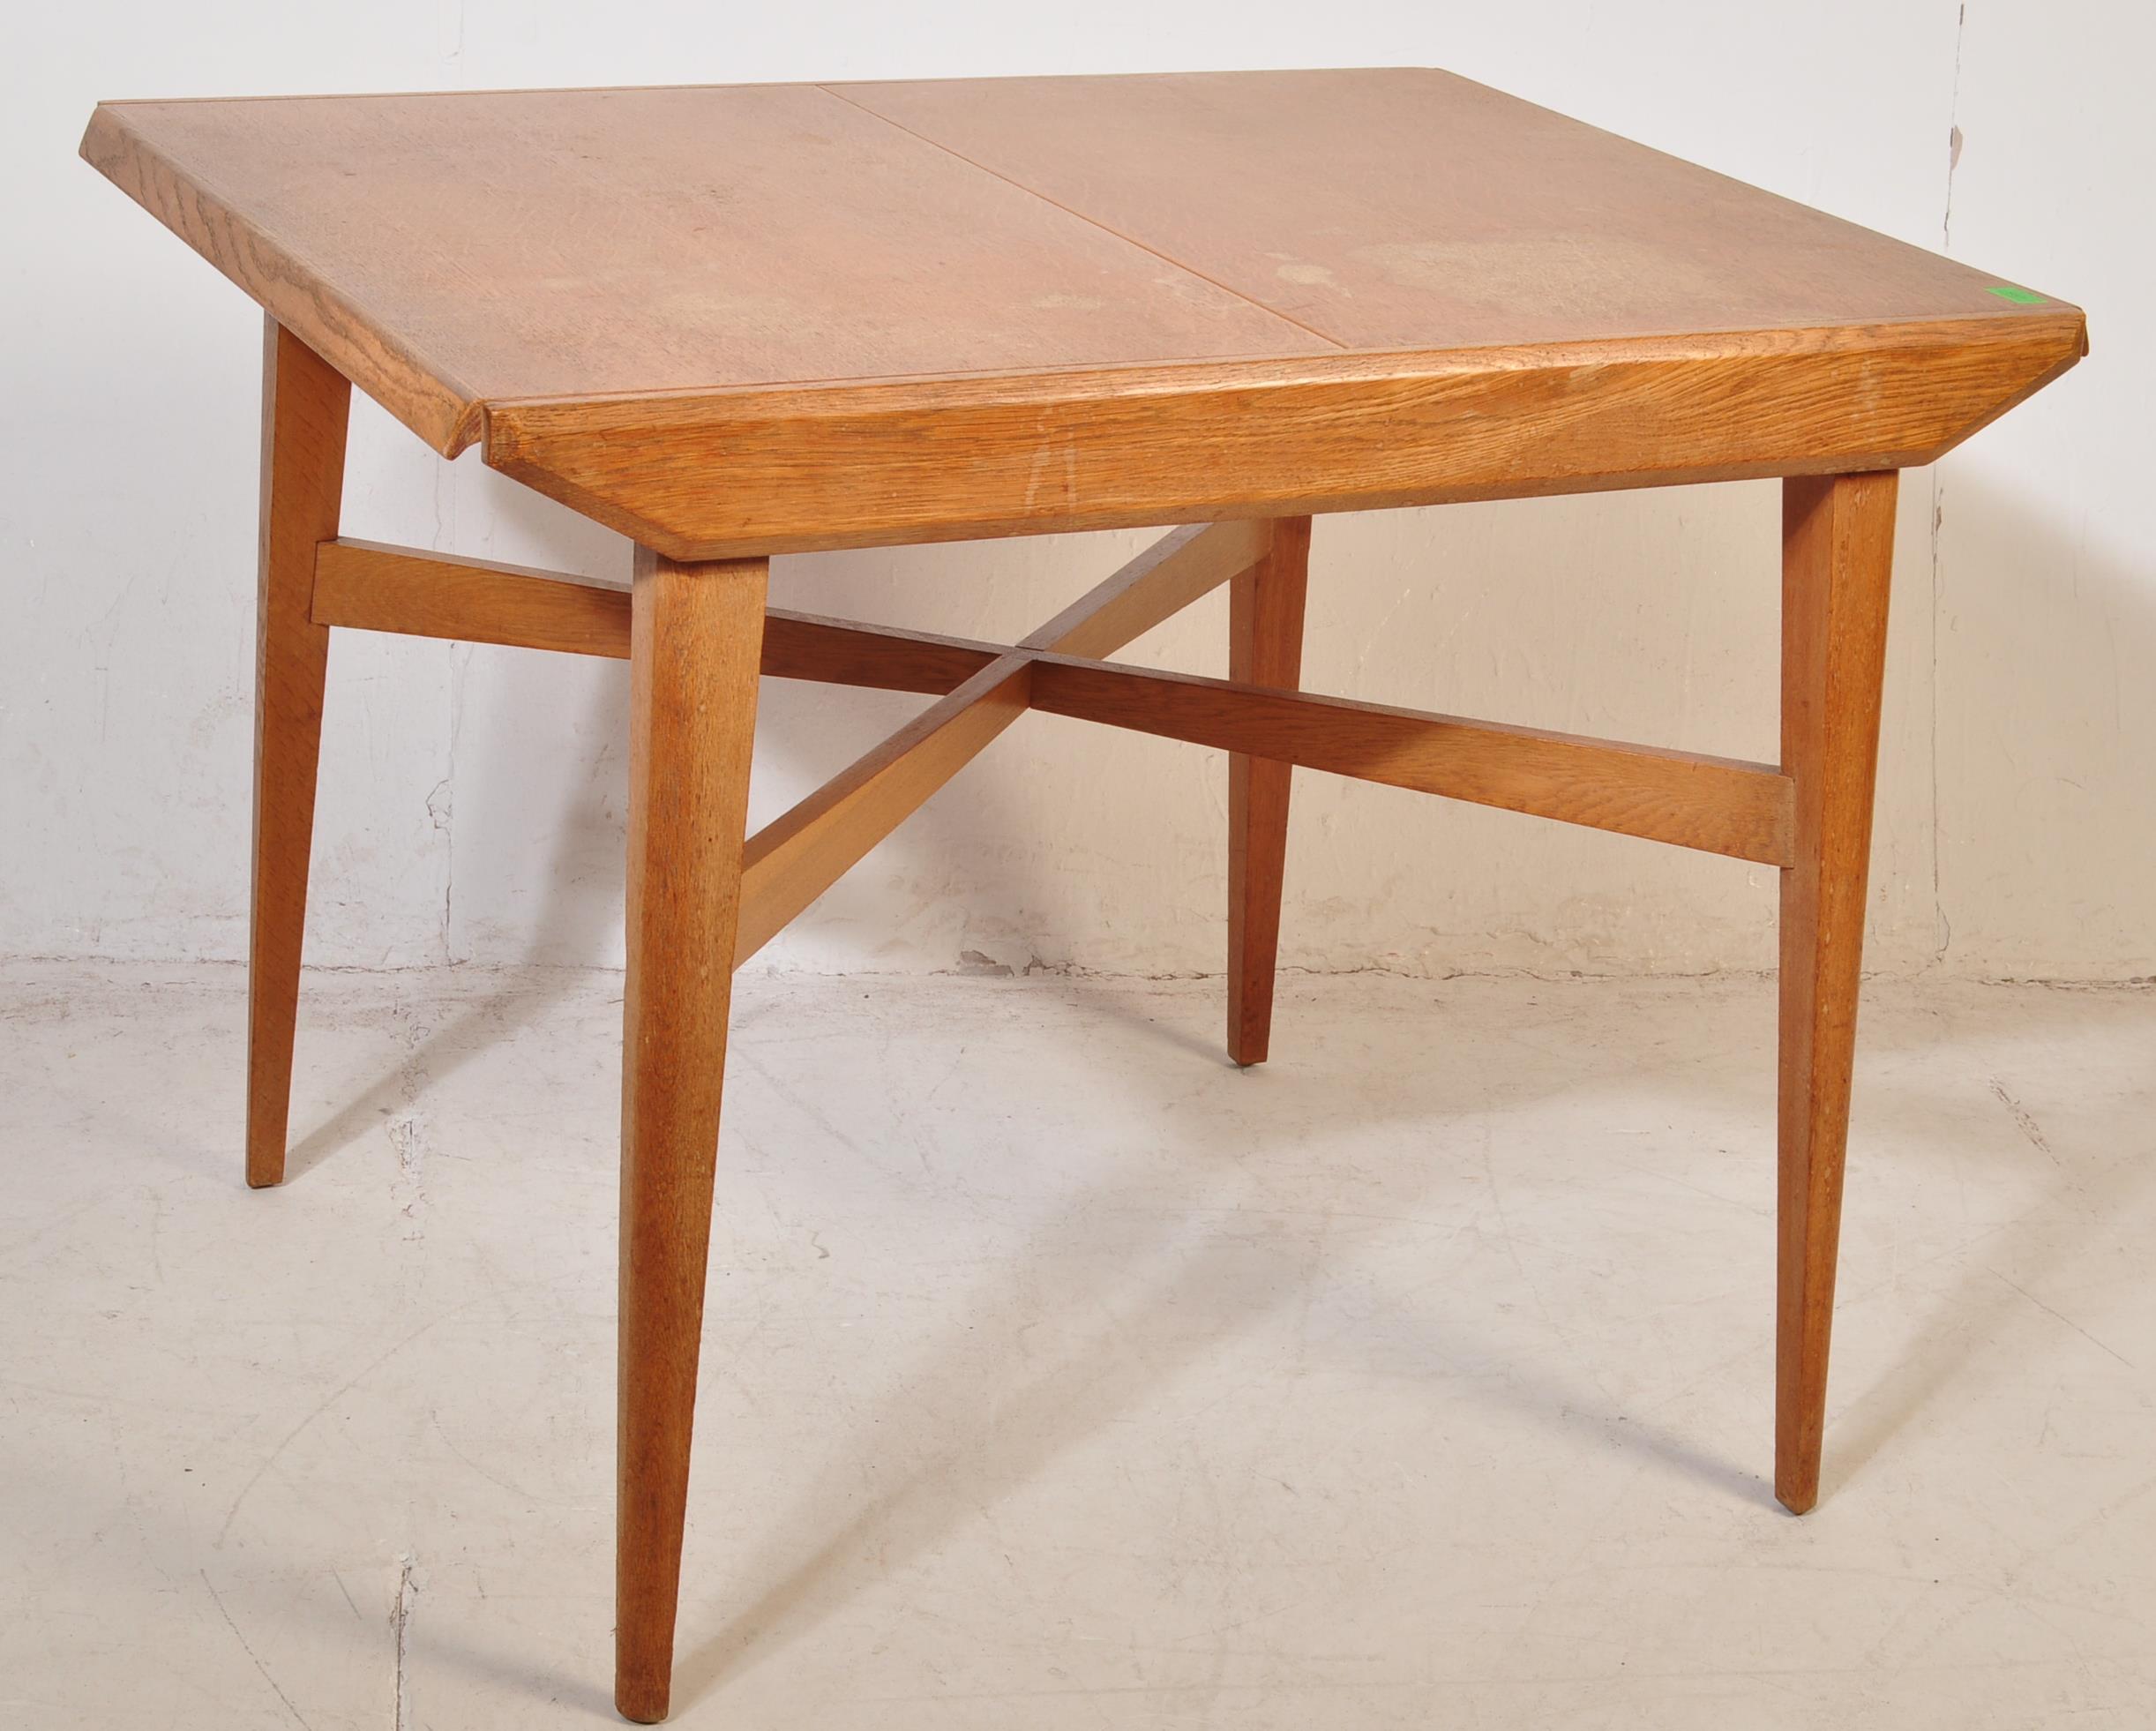 RETREO VINTAGE CIRCA 1950S OAK DINING TABLE - Image 2 of 7